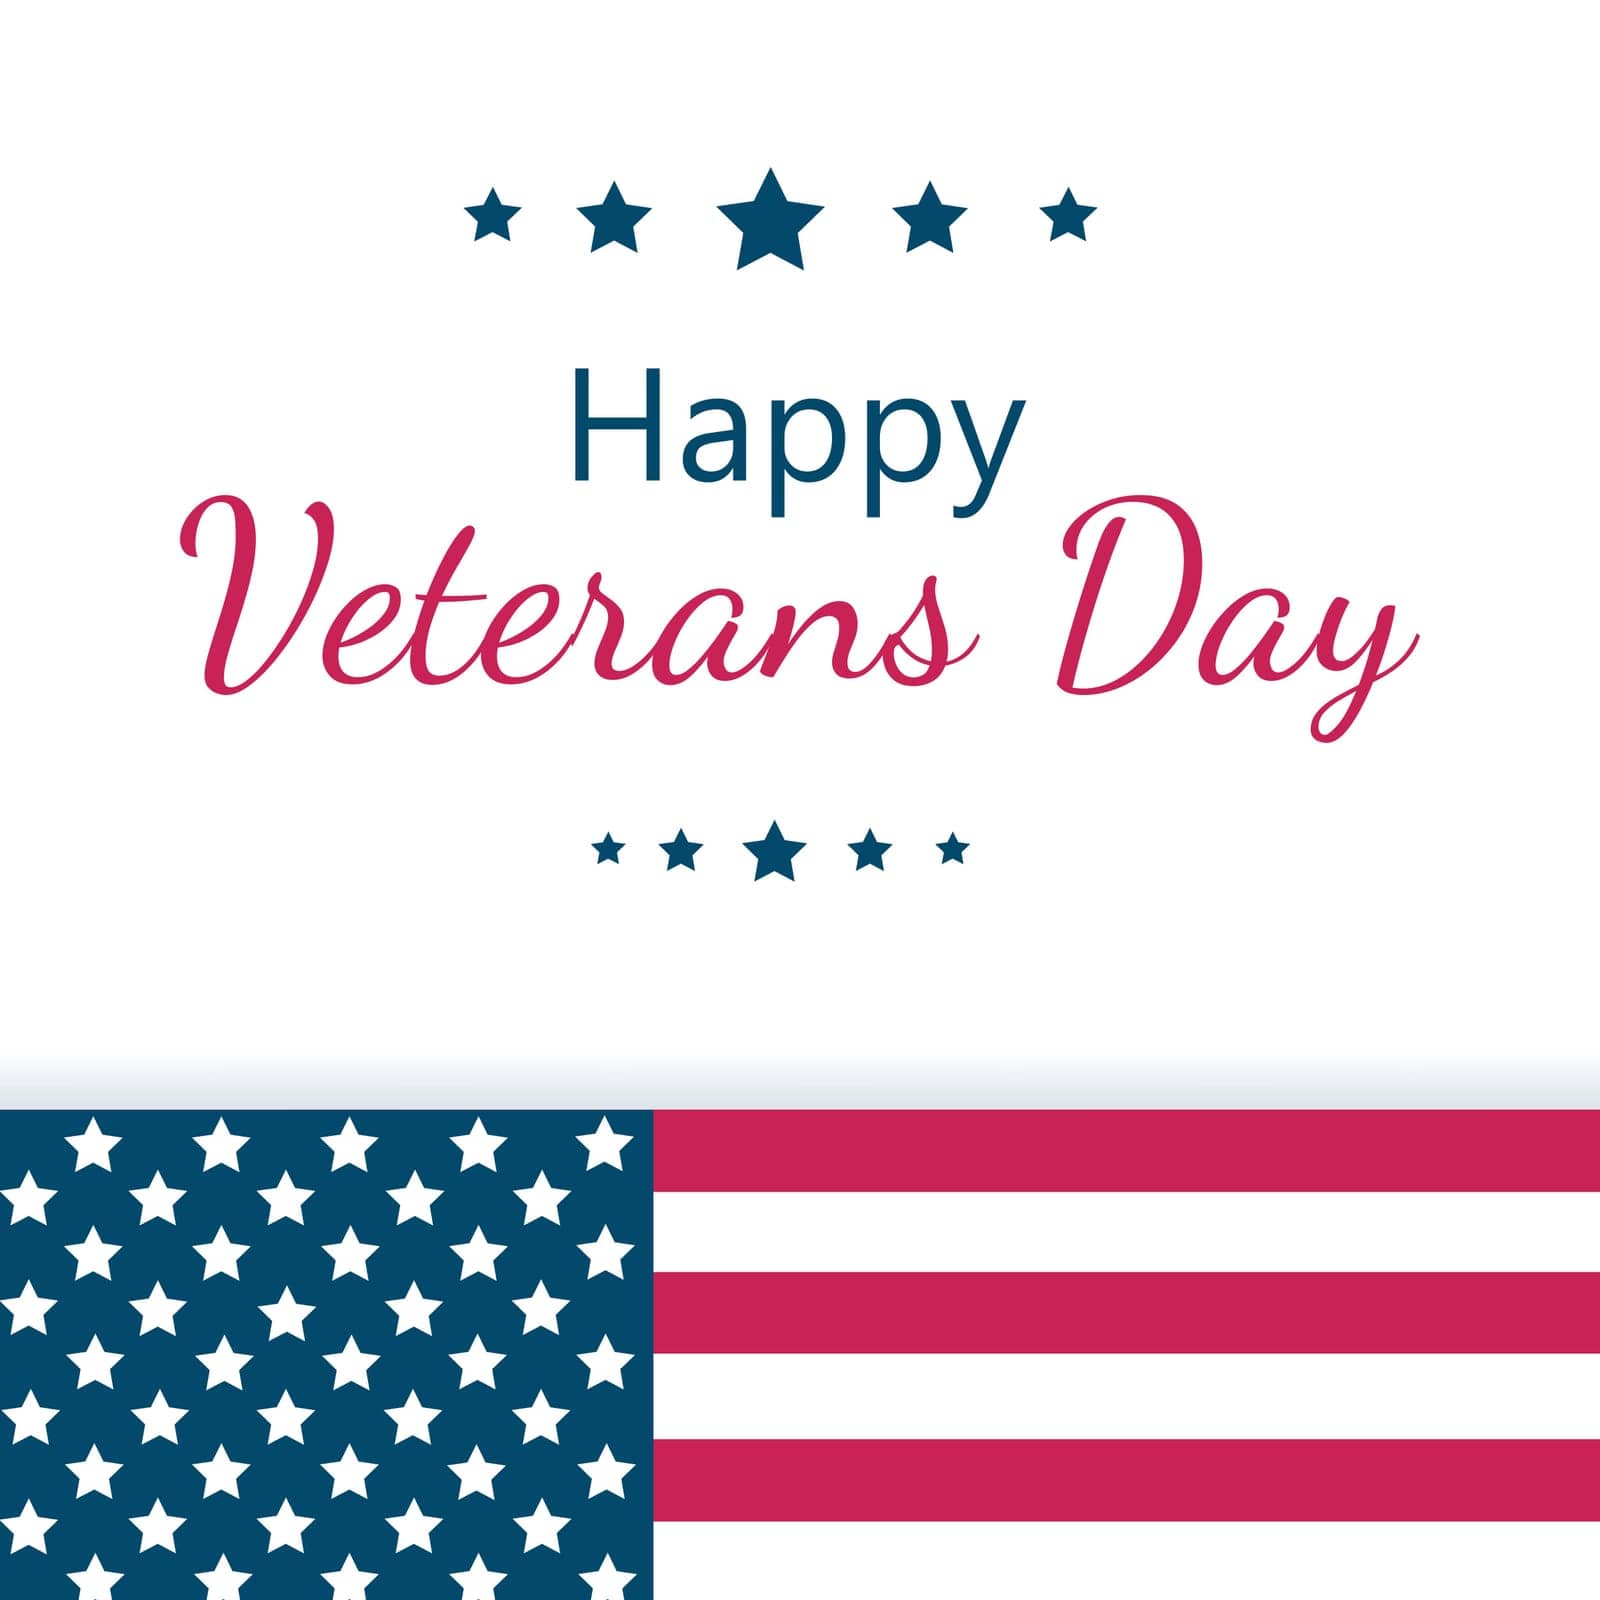 Creative vector illustration of Veterans Day. Honoring all who served.